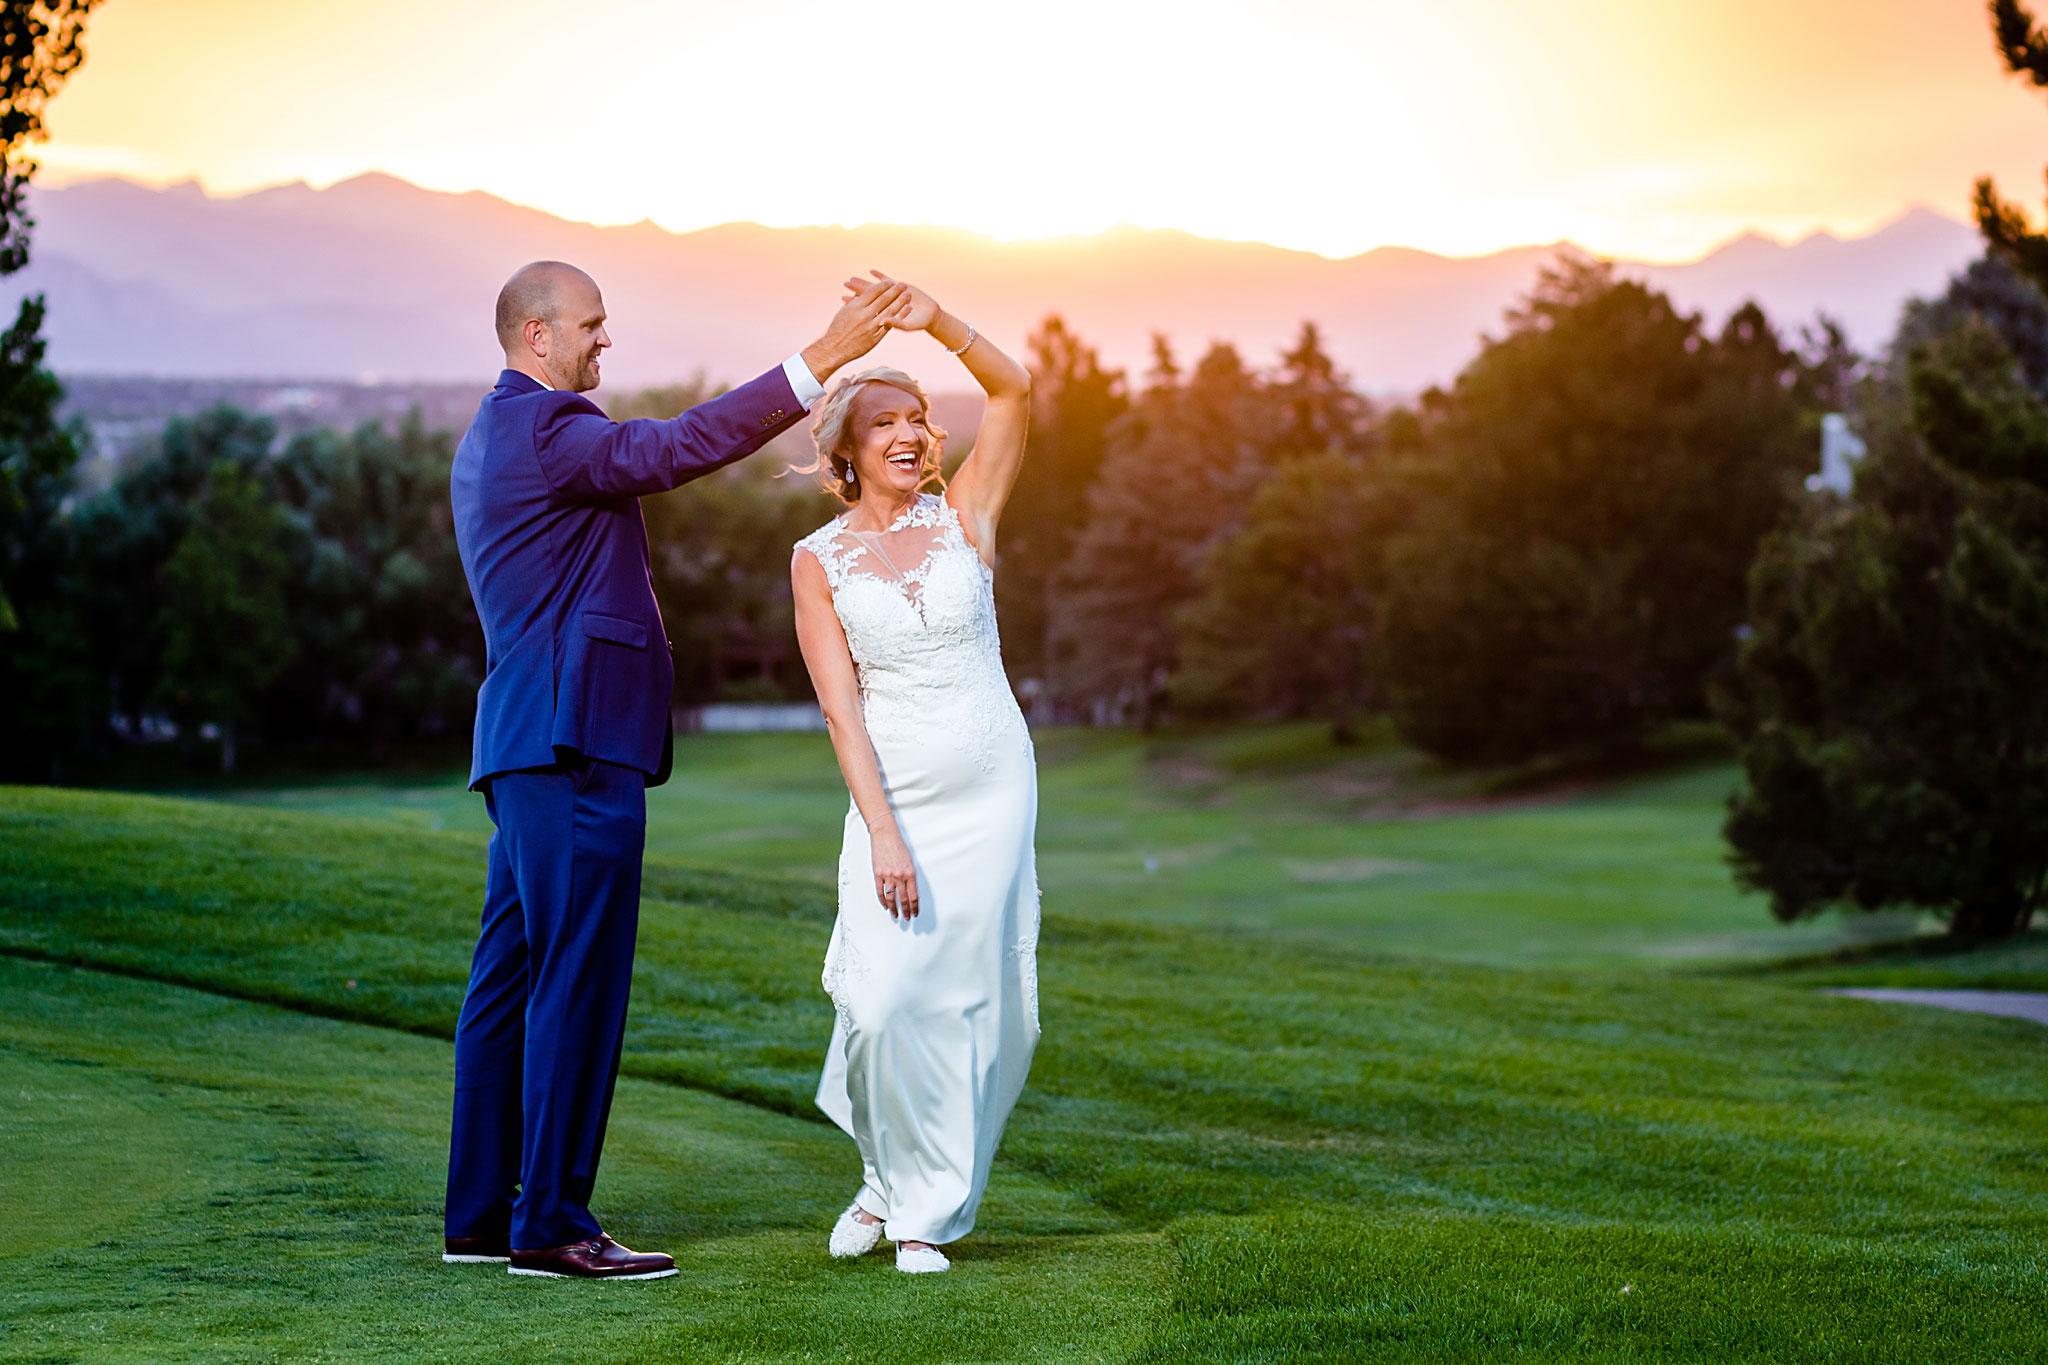 Beautiful Sunset Portraits with Bride and Groom. Kelli & Jason's golf course wedding at The Ranch Country Club by Colorado Wedding Photographer Jennifer Garza, Small wedding ideas, Intimate wedding, Golf Course Wedding, Country Club Wedding, Summer Wedding, Golf Wedding, Wedding planning, Colorado Wedding Photographer, Colorado Elopement Photographer, Colorado Elopement, Colorado Wedding, Denver Wedding Photographer, Denver Wedding, Wedding Inspiration, Summer Wedding Inspiration, Covid Wedding